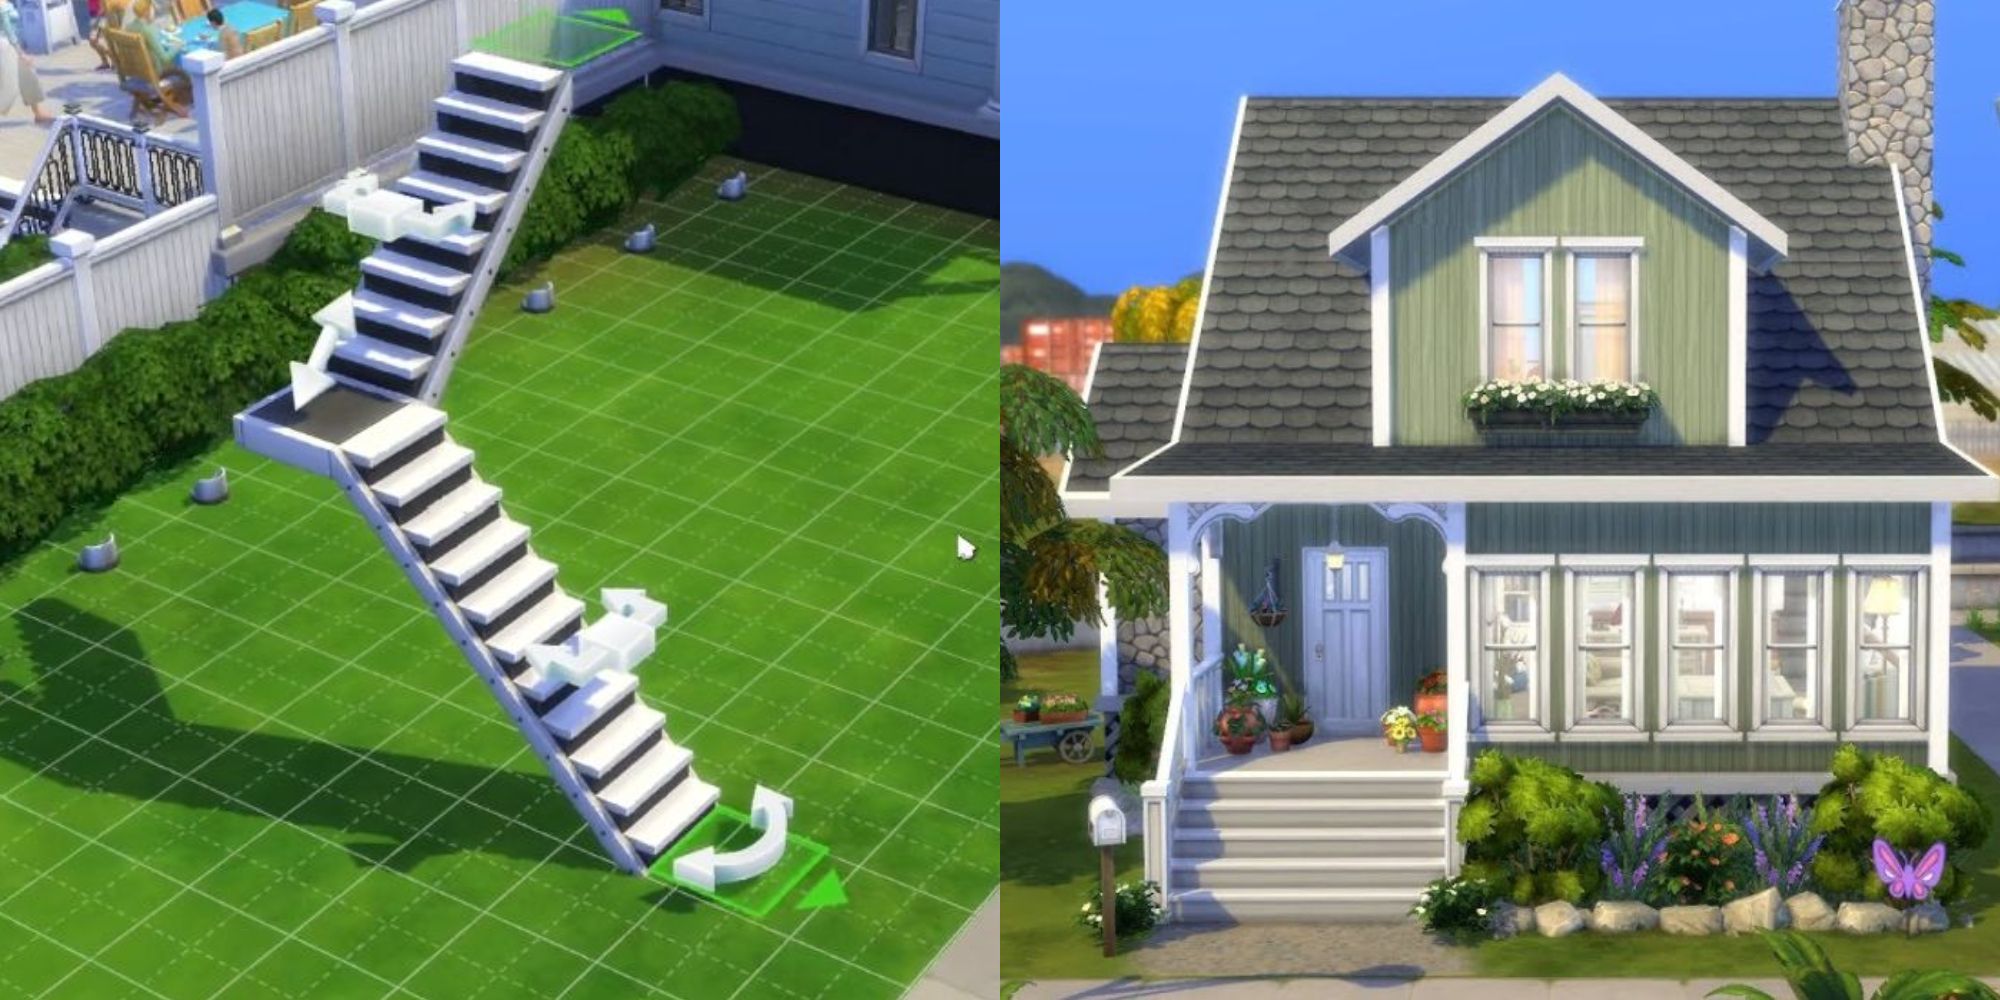 The Sims 4: 10 Tips & Tricks To Improve Your Builds